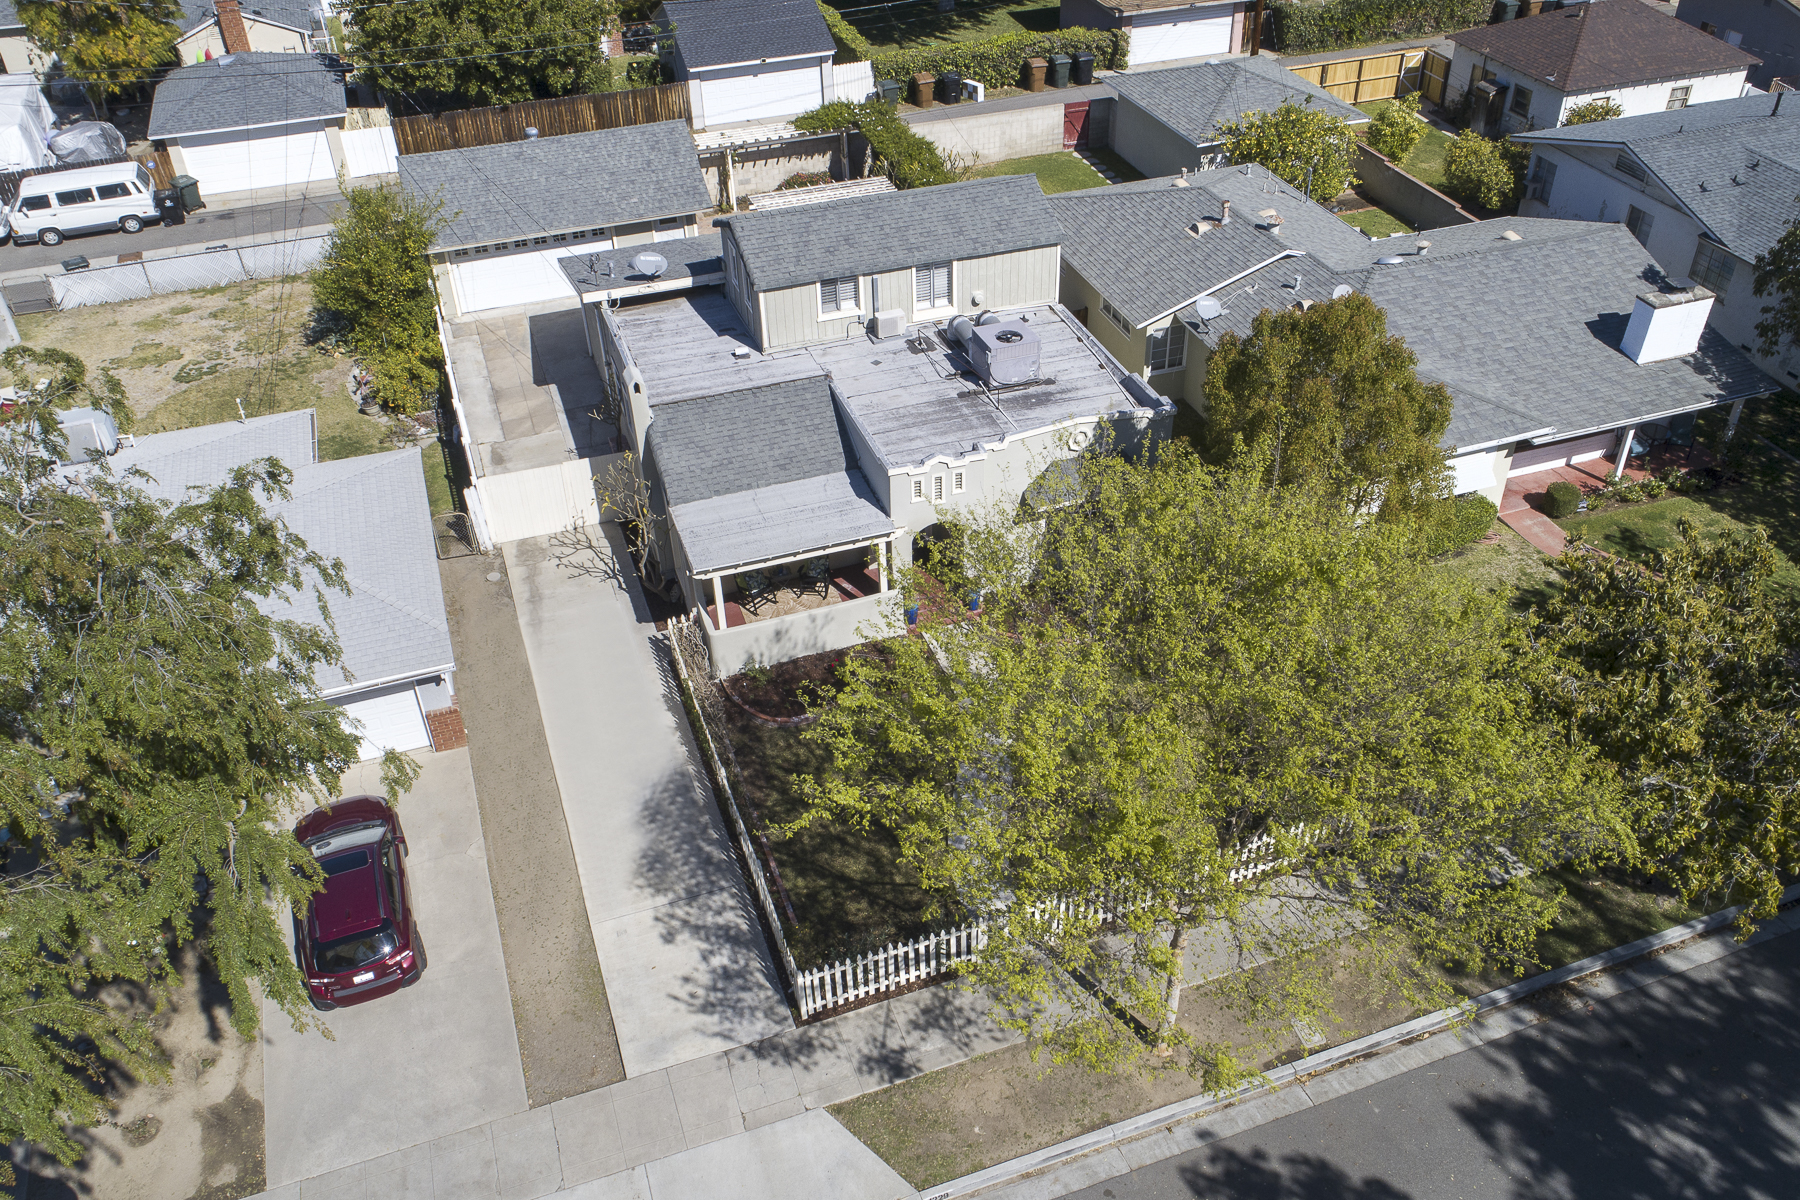 1229 Grove Place Fullerton CA 92831: Aerial view of property from the front